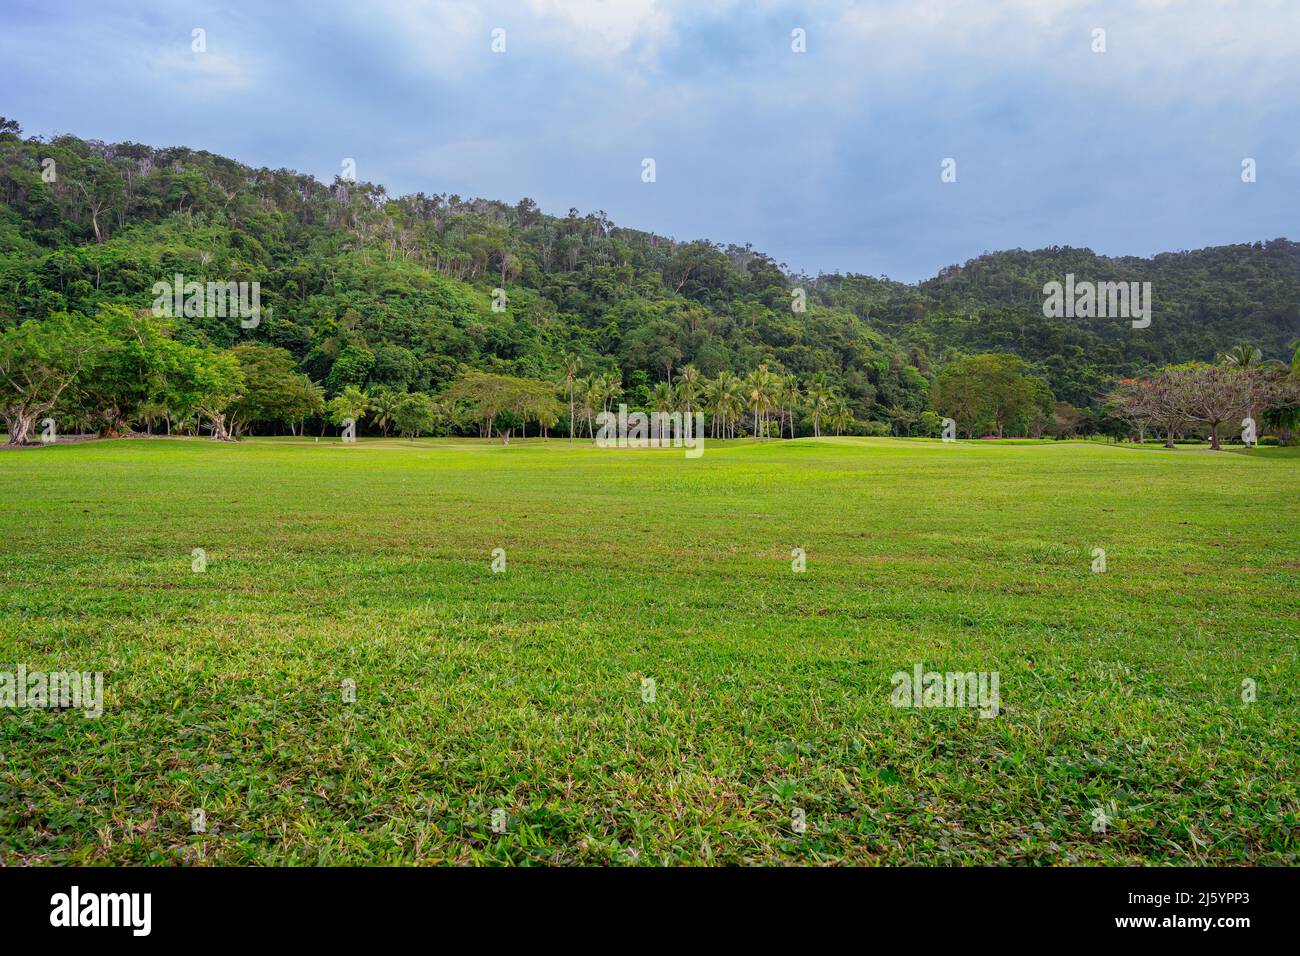 Grassland by a Forest Hiill Background Stock Photo